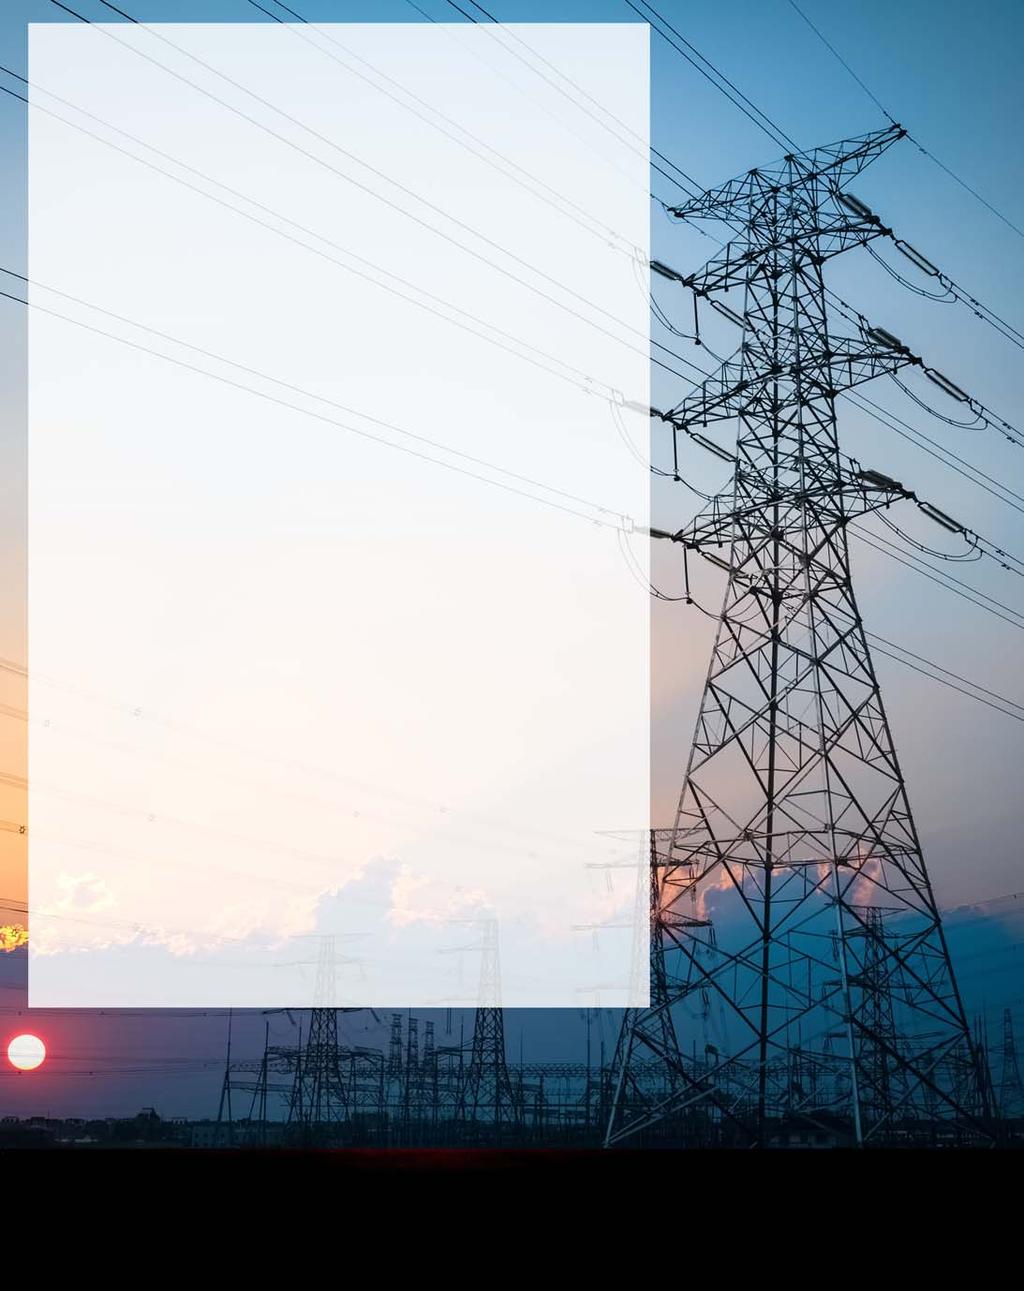 ELECTRICITY TRANSMISSION IN INDIA Industry Analysis, Outlook and Projections Global Transmission Research has just released a new report titled Electricity Transmission in India: Industry Analysis,